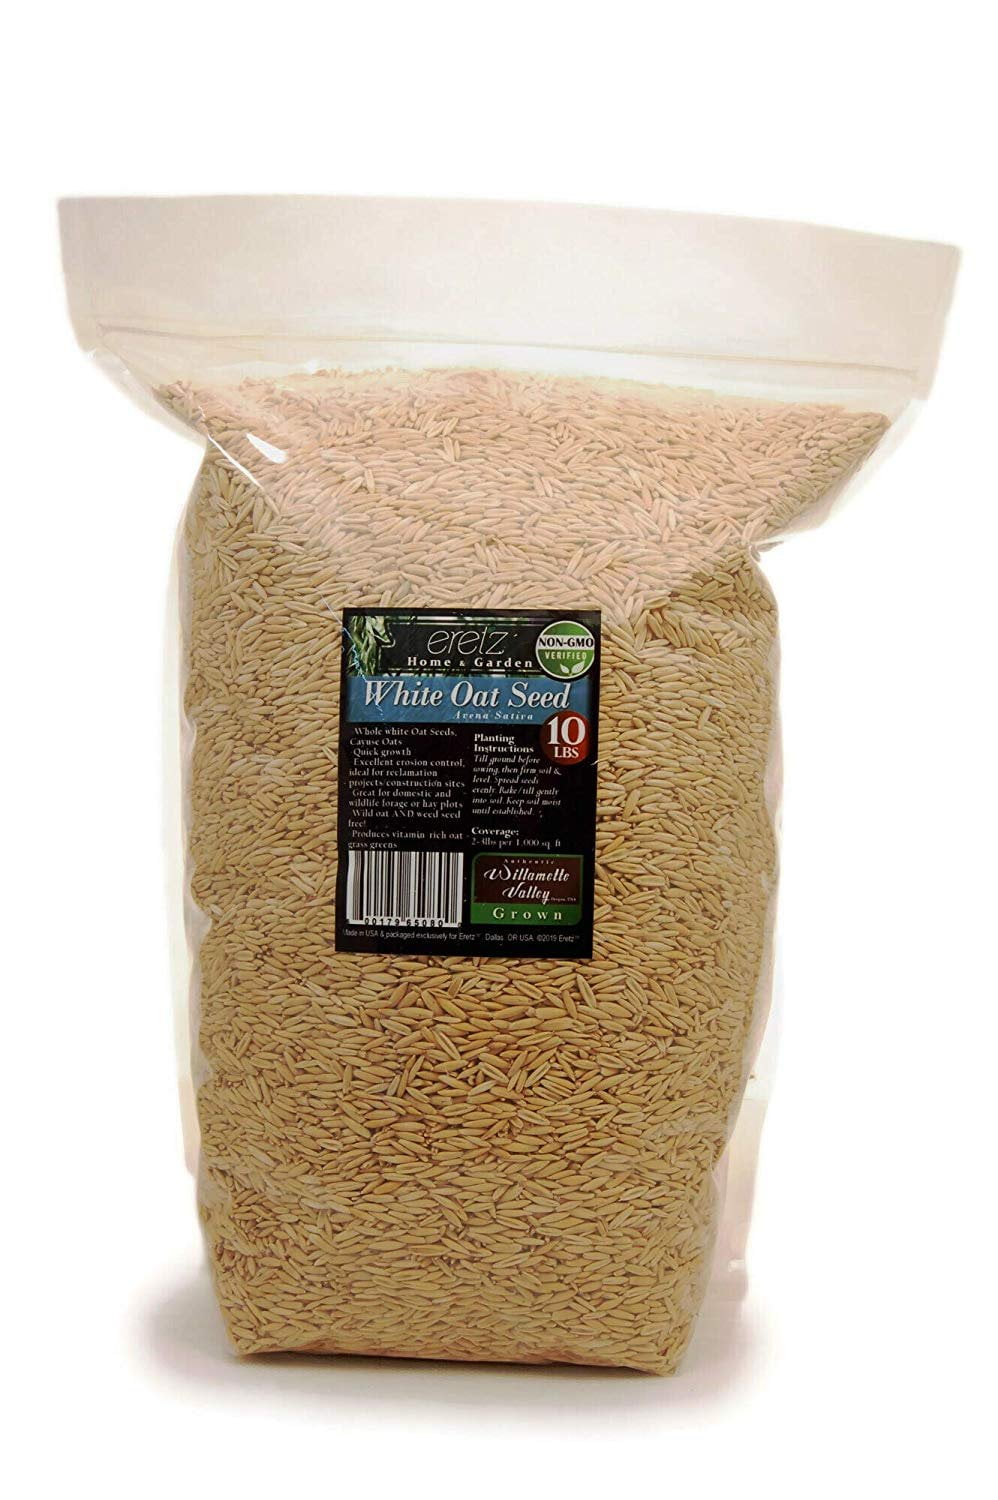 Oregon Grown 1lb No Weed Seeds State Certified Oat Grains- No Fillers Choose Size White Oat Seed by Eretz No Coatings 